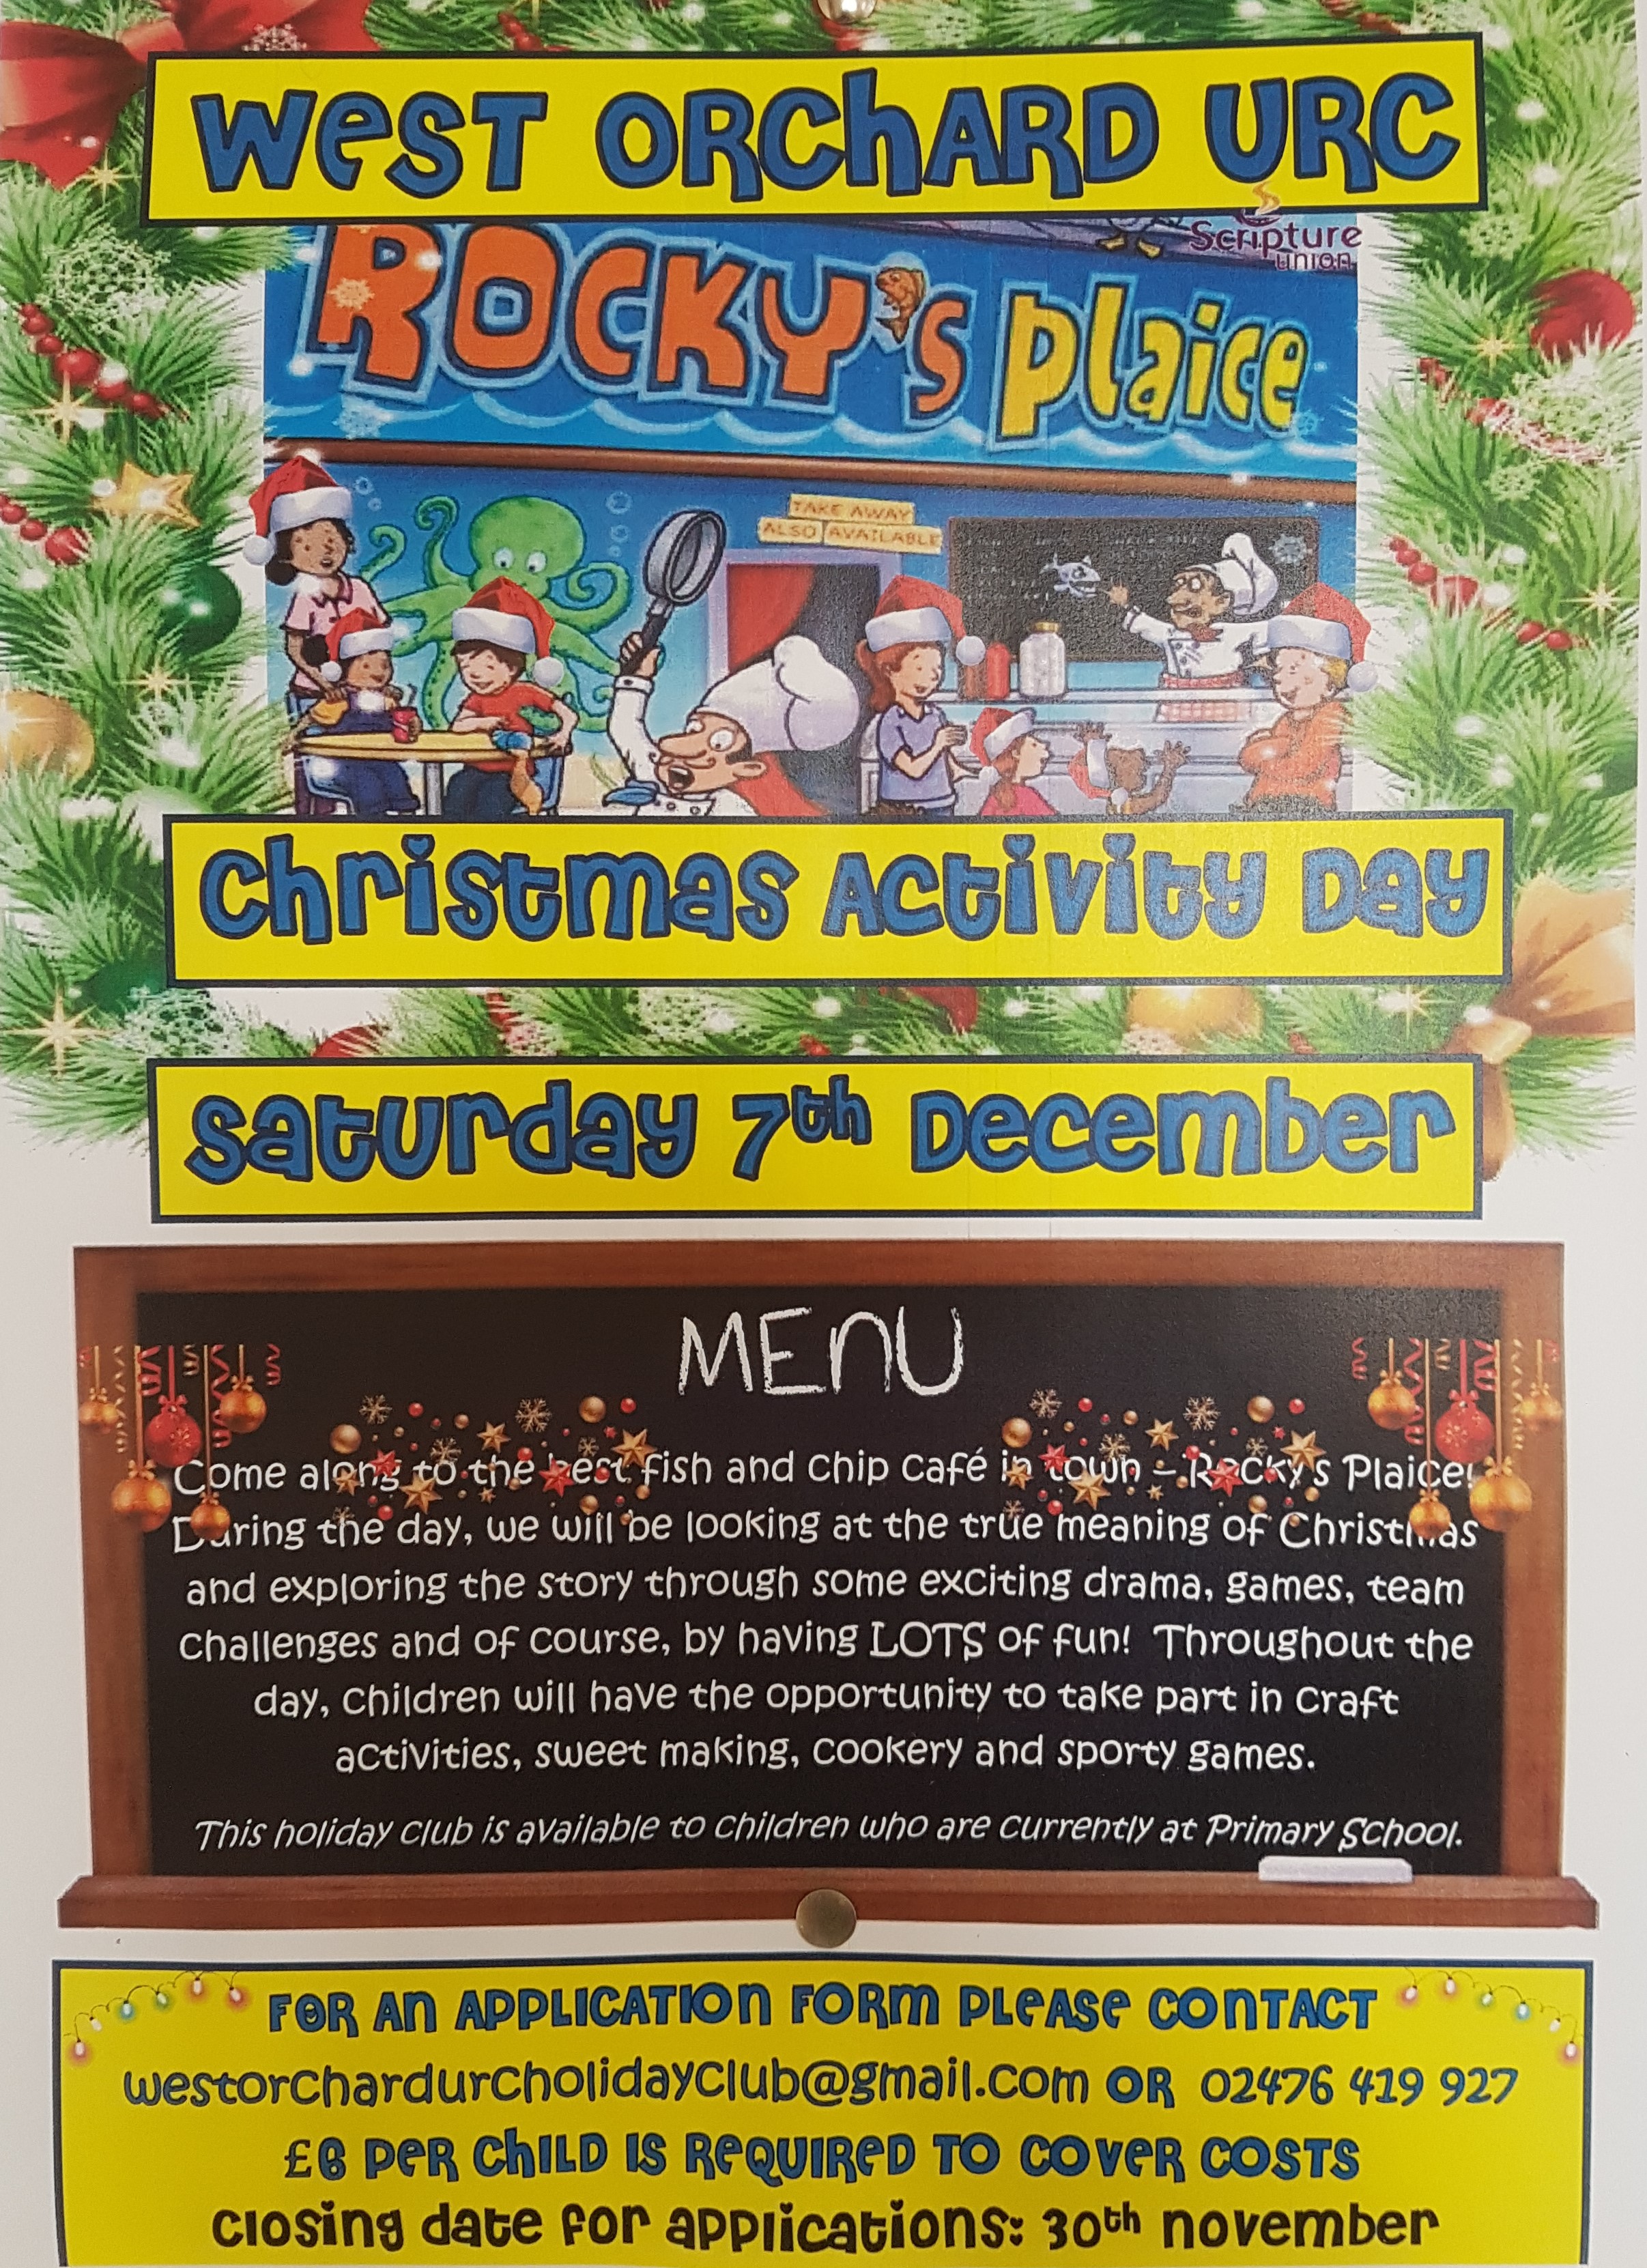 Christmas Activity Day, Saturday 7th December